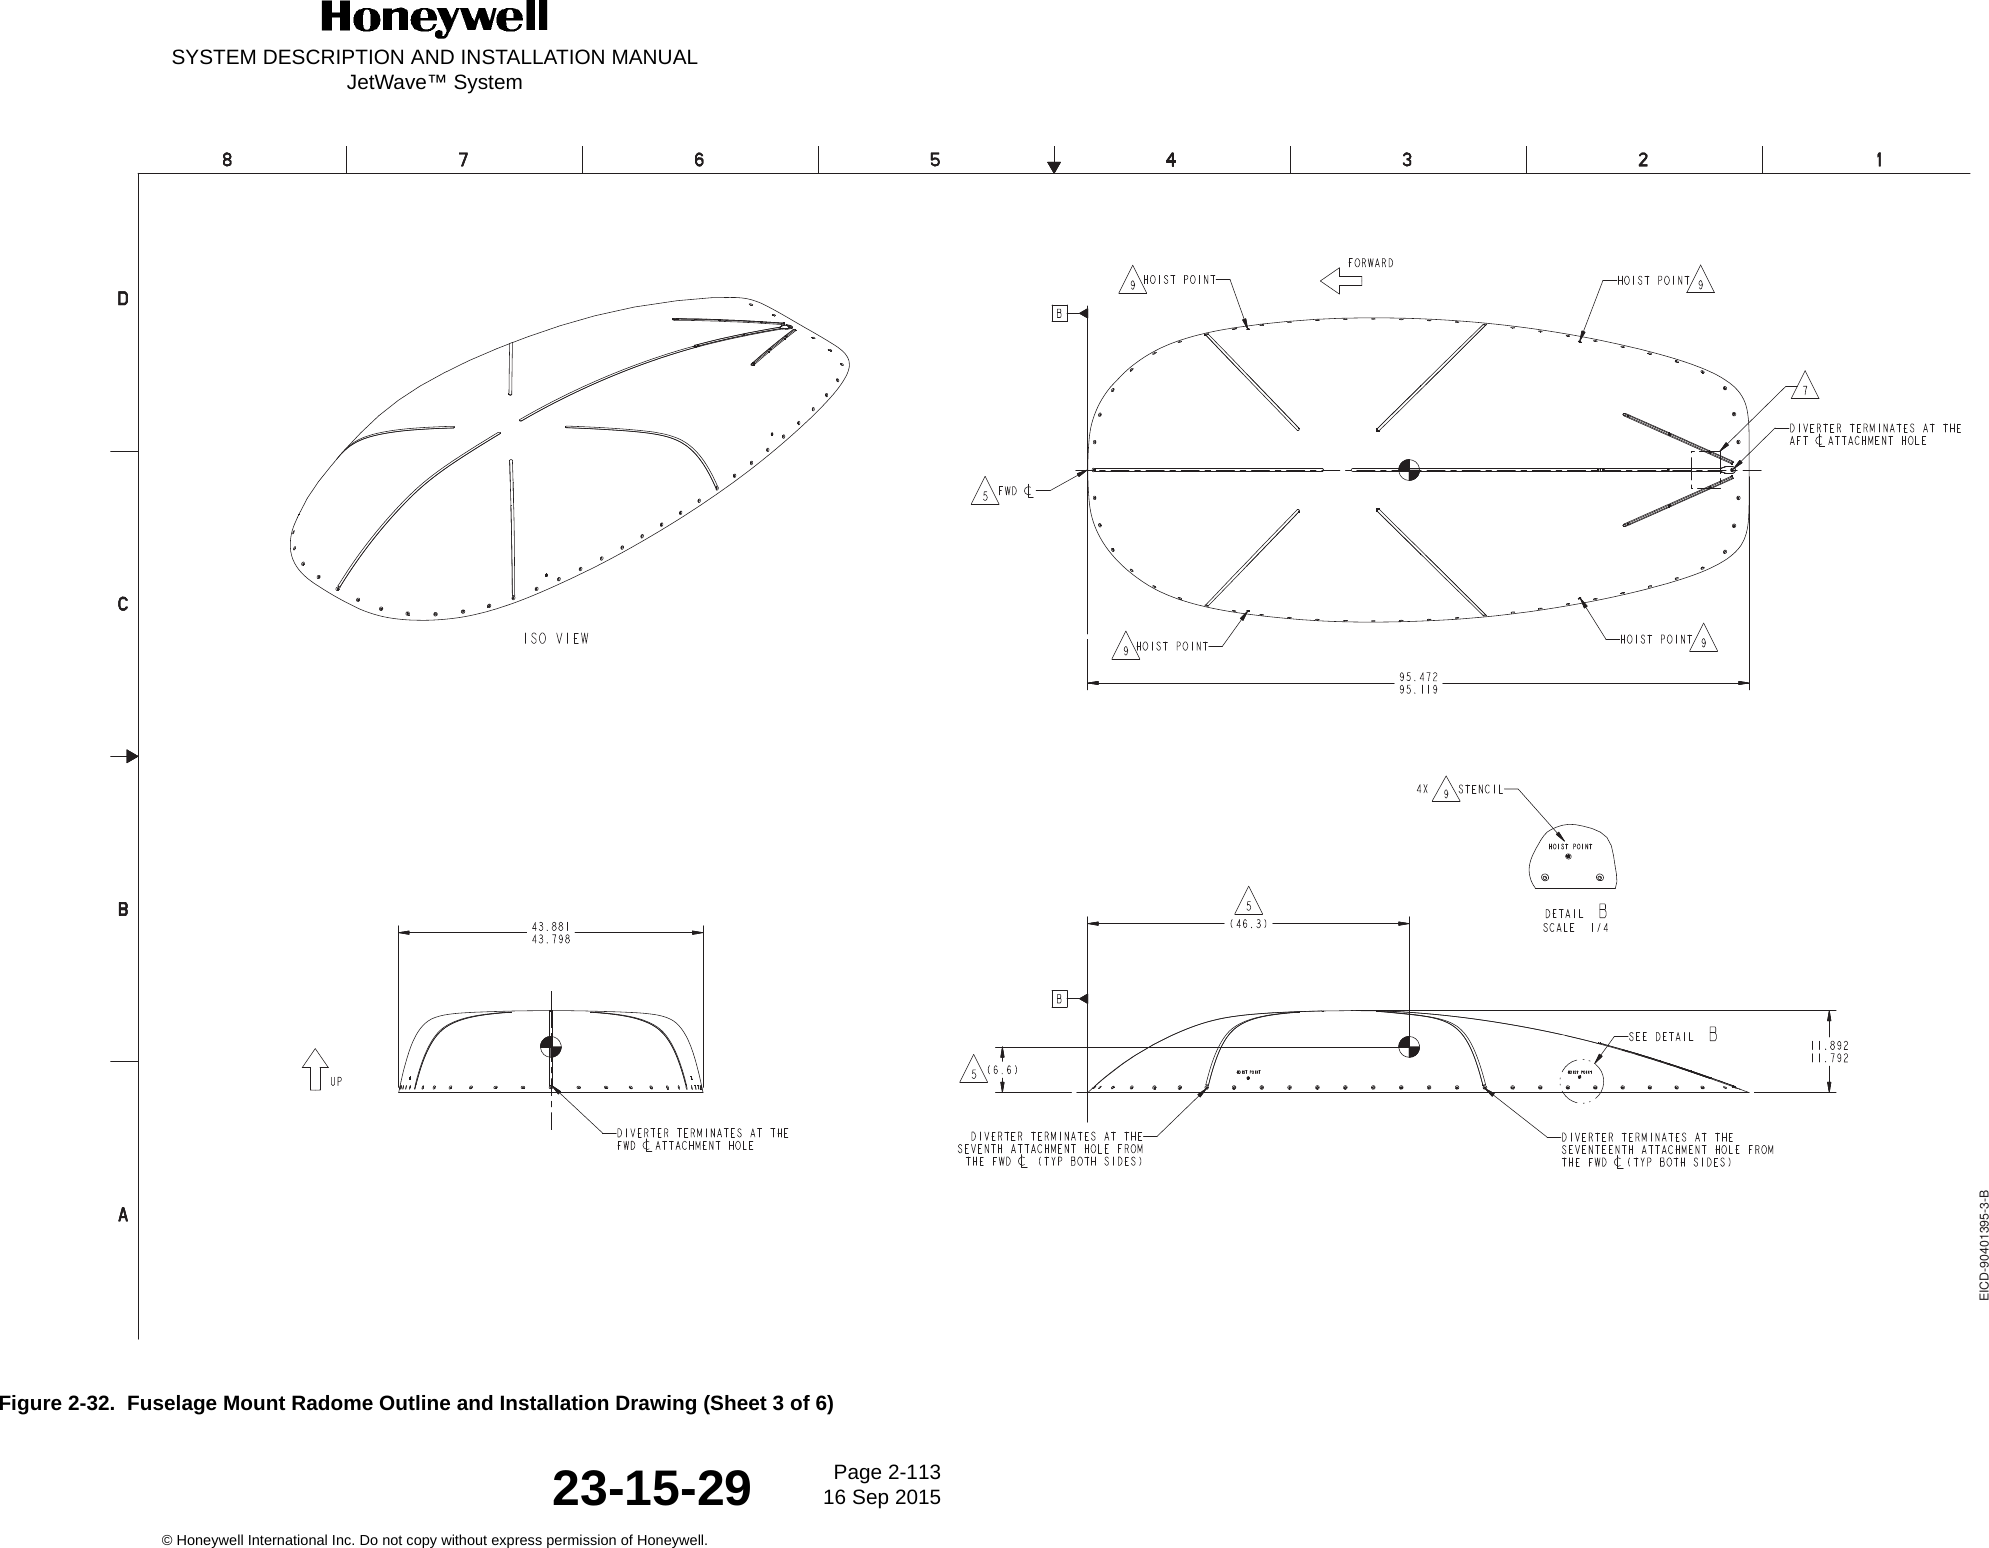 SYSTEM DESCRIPTION AND INSTALLATION MANUALJetWave™ SystemPage 2-113 16 Sep 2015© Honeywell International Inc. Do not copy without express permission of Honeywell.23-15-29Figure 2-32.  Fuselage Mount Radome Outline and Installation Drawing (Sheet 3 of 6) EICD-90401395-3-B